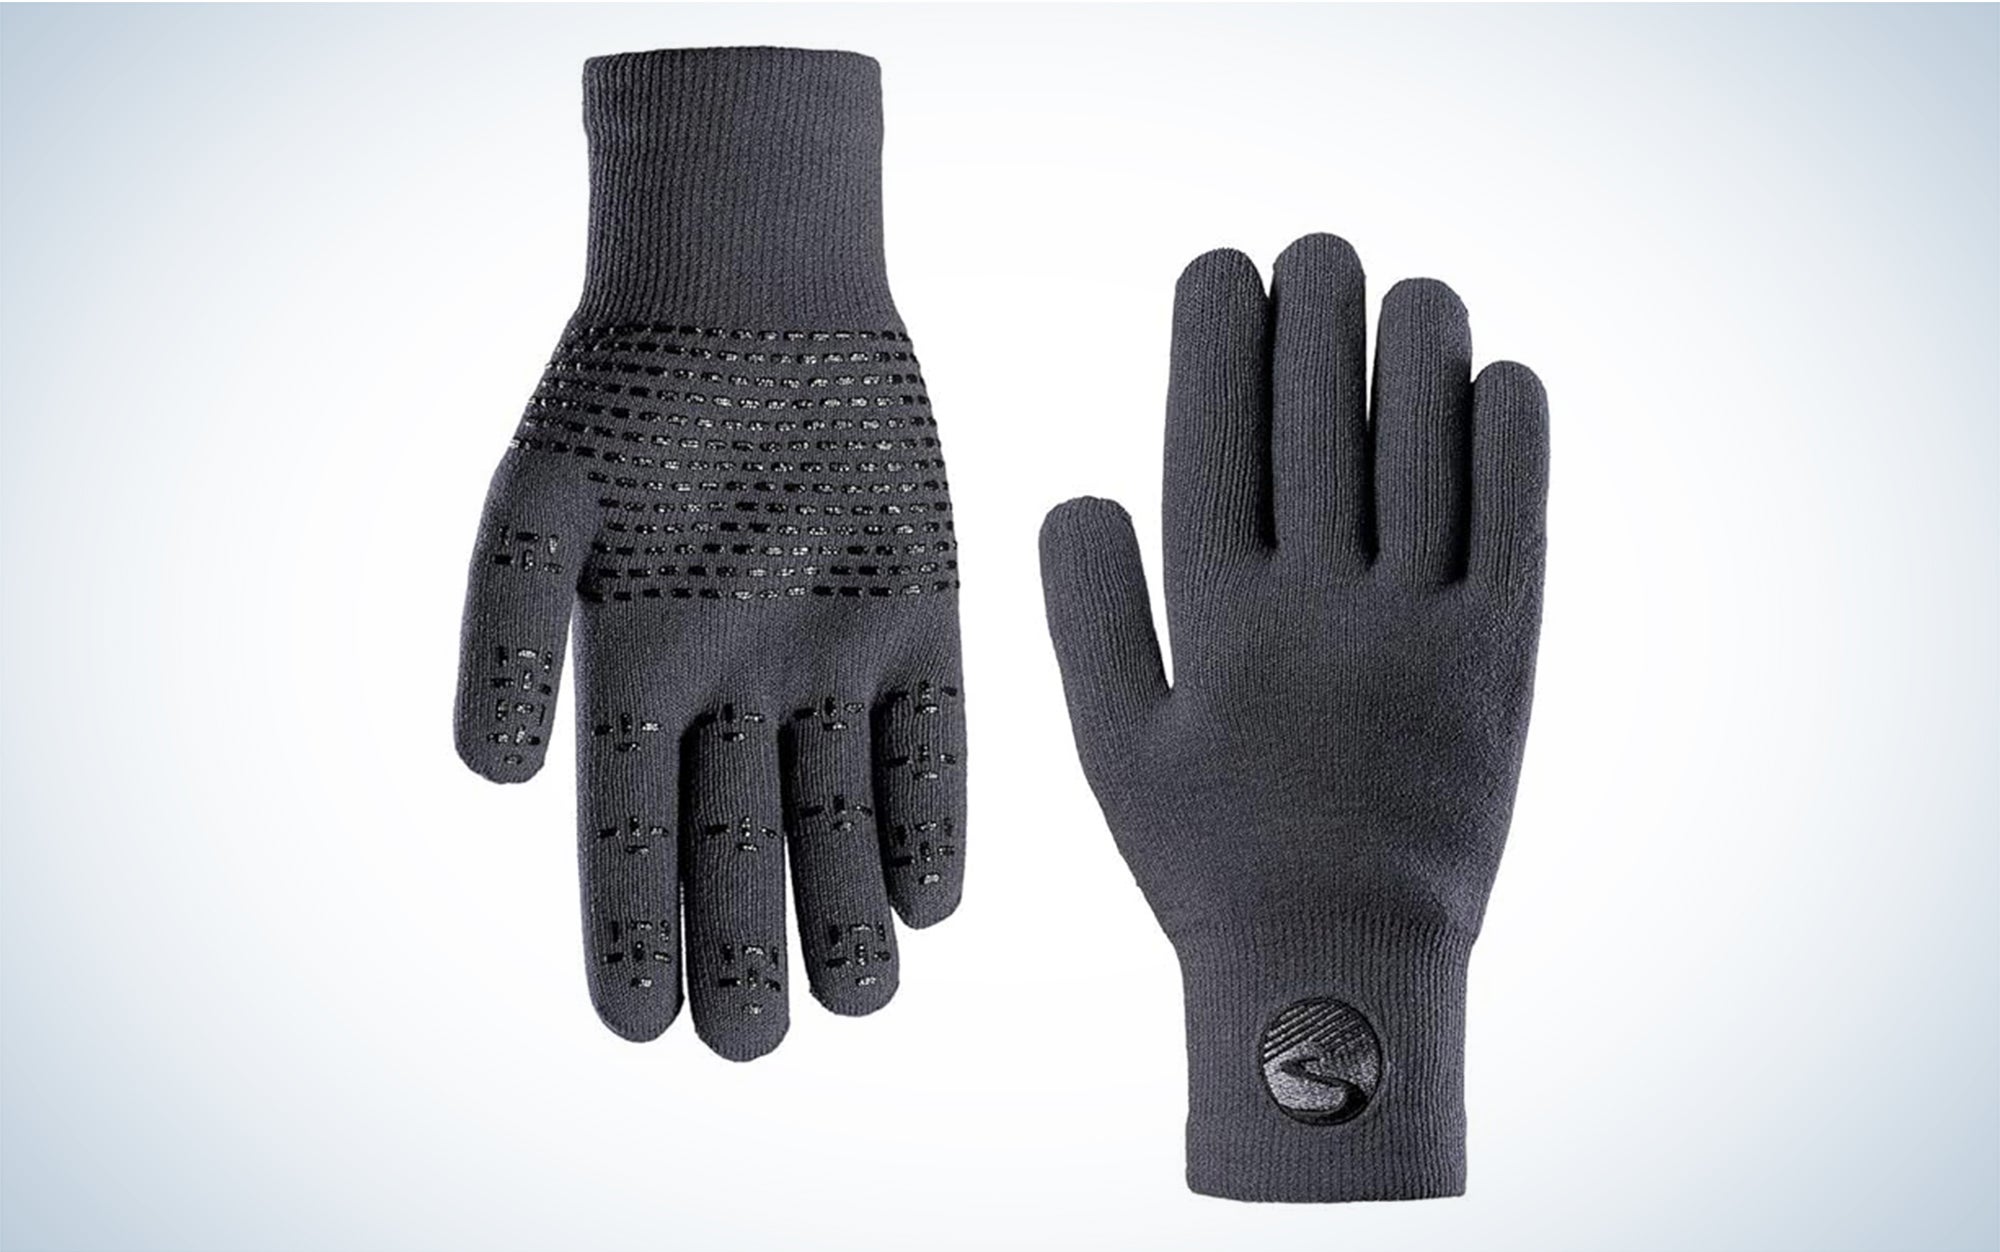 We tested the Showers Pass Crosspoint Knit Waterproof Gloves.